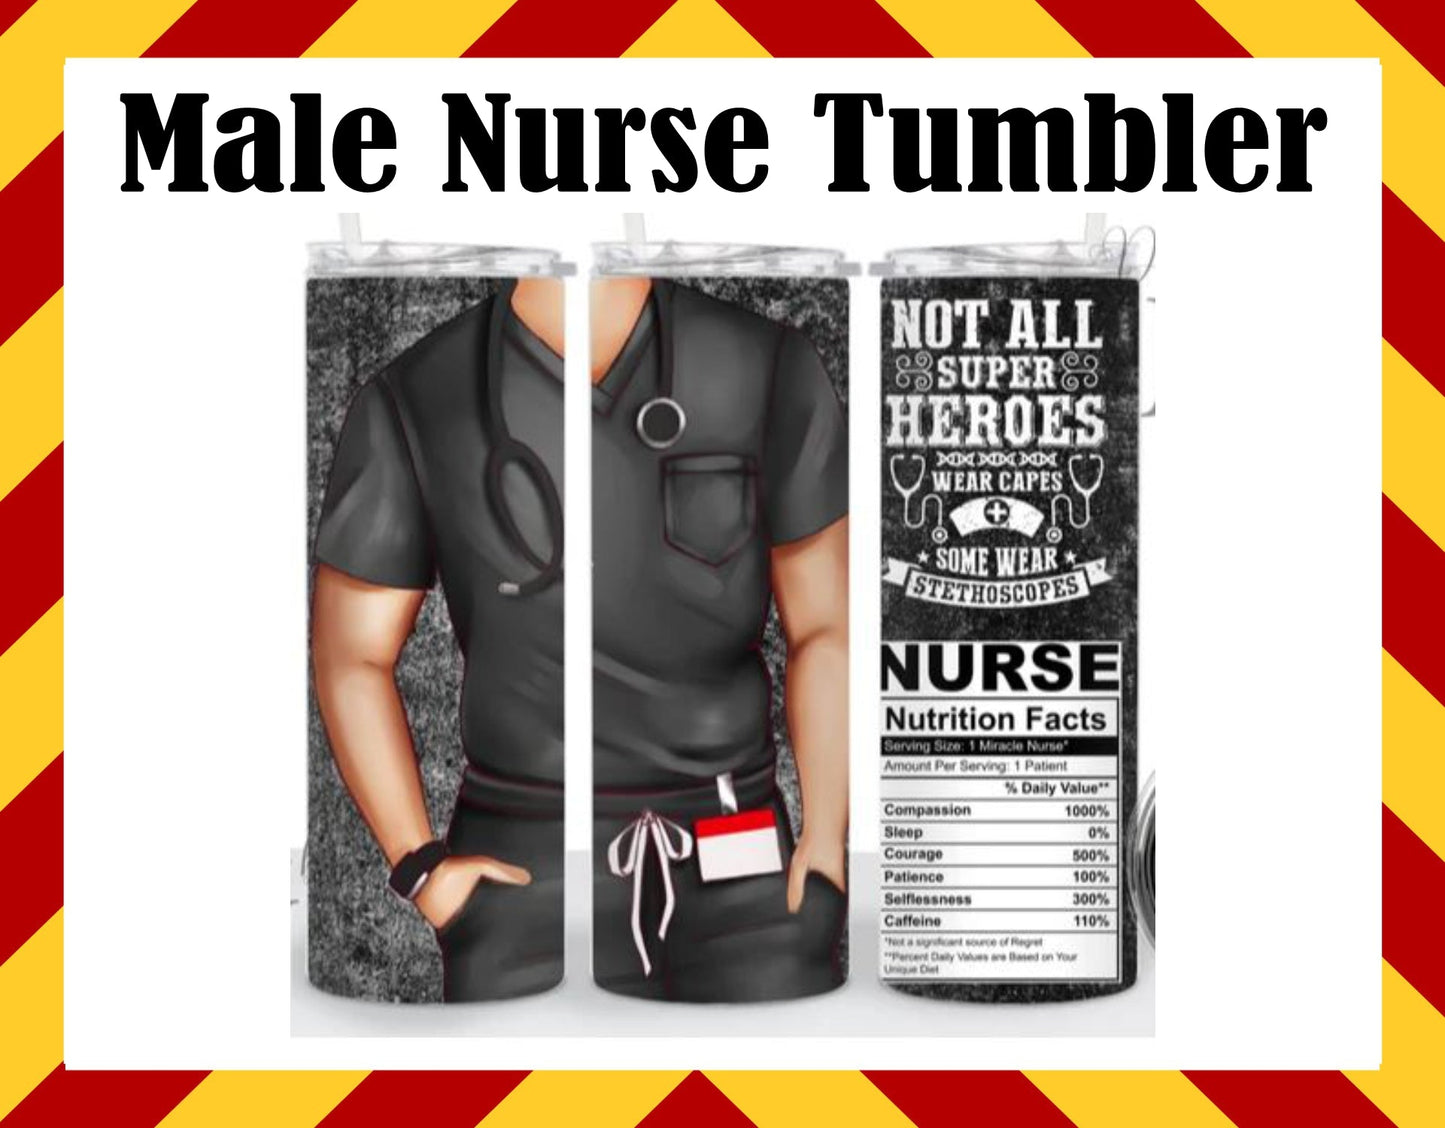 Stainless Steel Cup - Male Nurse Design Hot/Cold Cup